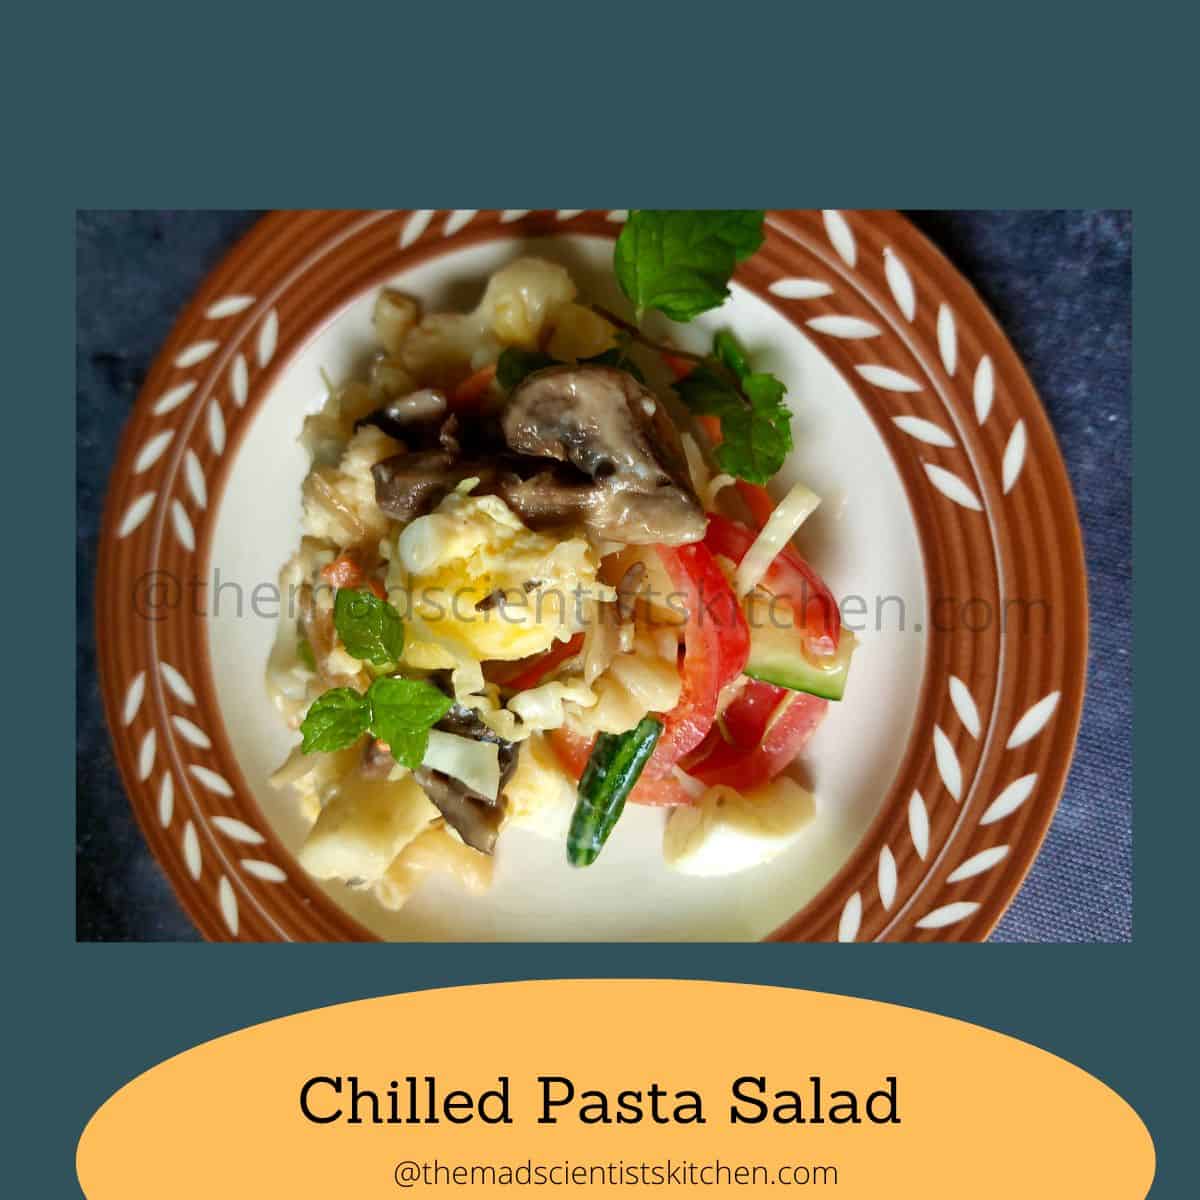 My serving of perfectly chilled vegetarian pasta salad.